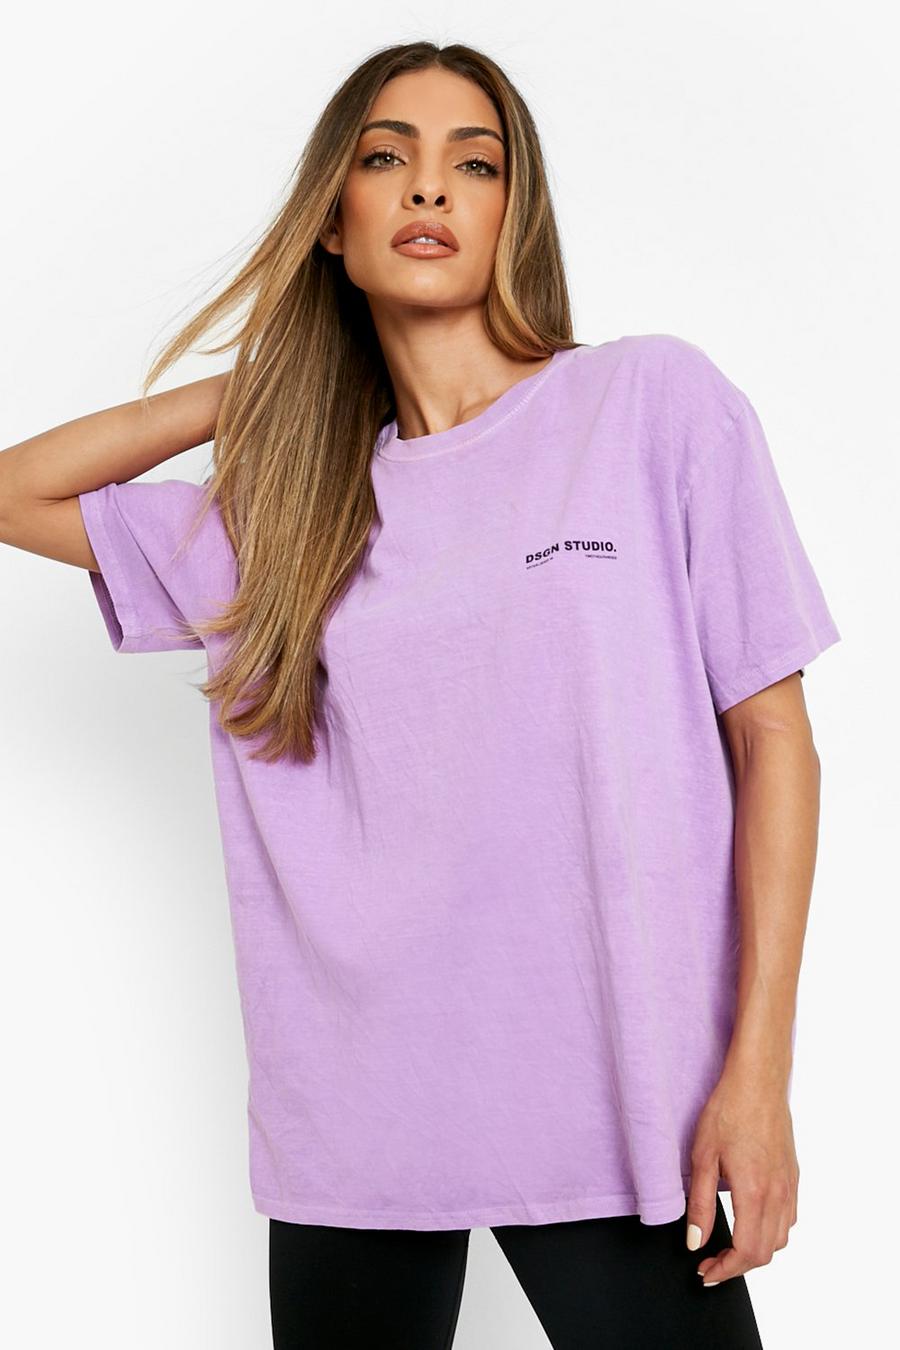 Purple Dsgn Studio Overdyed Printed T-shirt image number 1